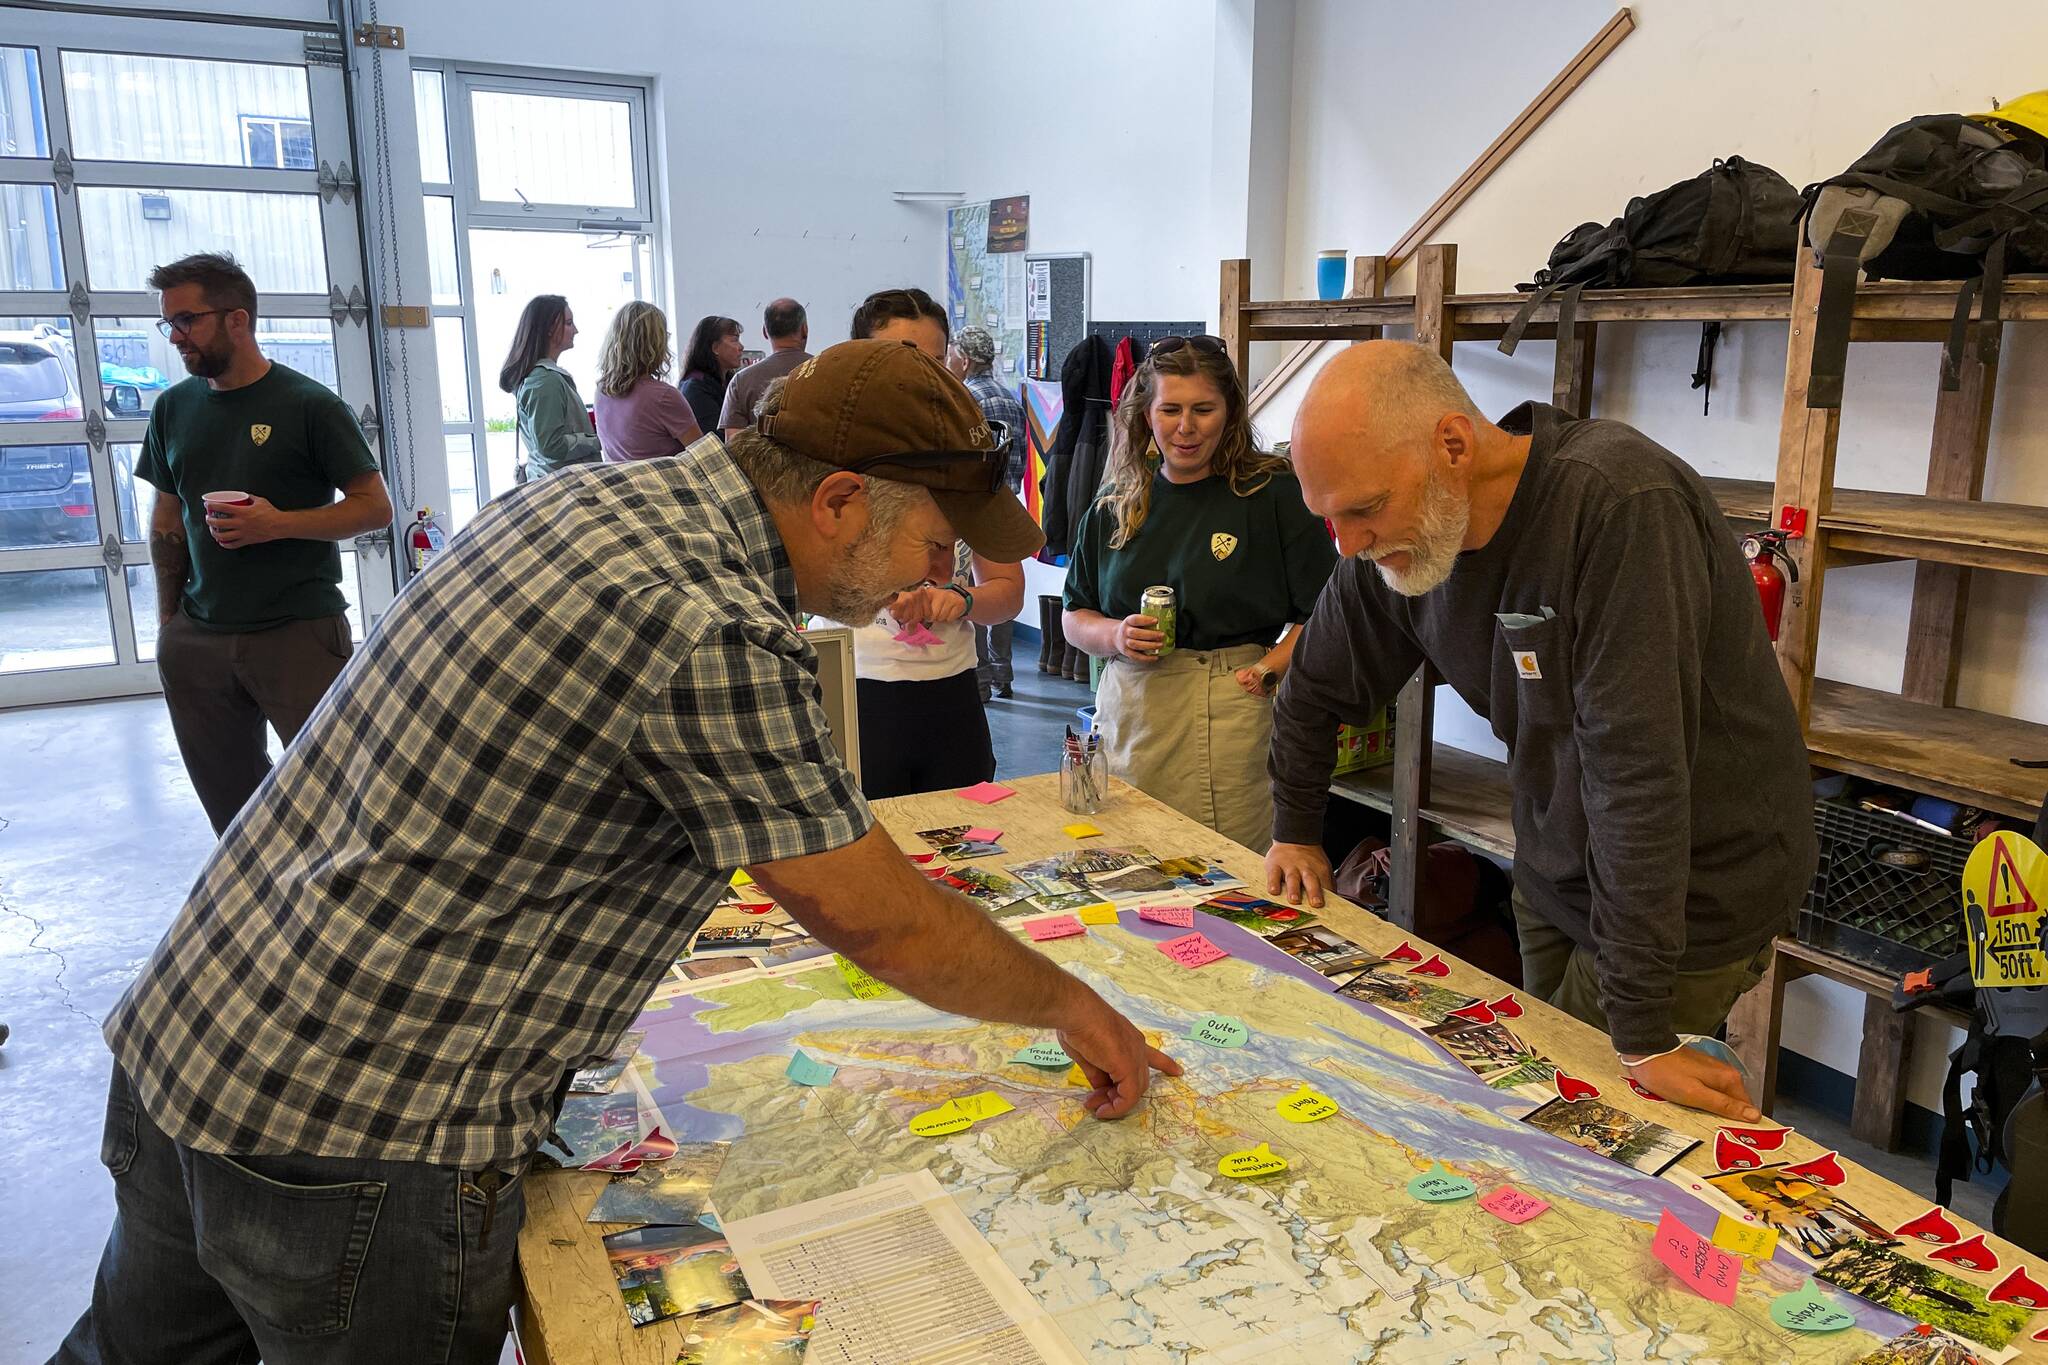 Juneau Parks and Recreation director George Schaaf, left, looks at a map with Trail Mix Inc. board member Chris Meade during the nonprofit’s annual National Trails Day event in their new office space on June 4, 2022. (Michael S. Lockett / Juneau Empire)